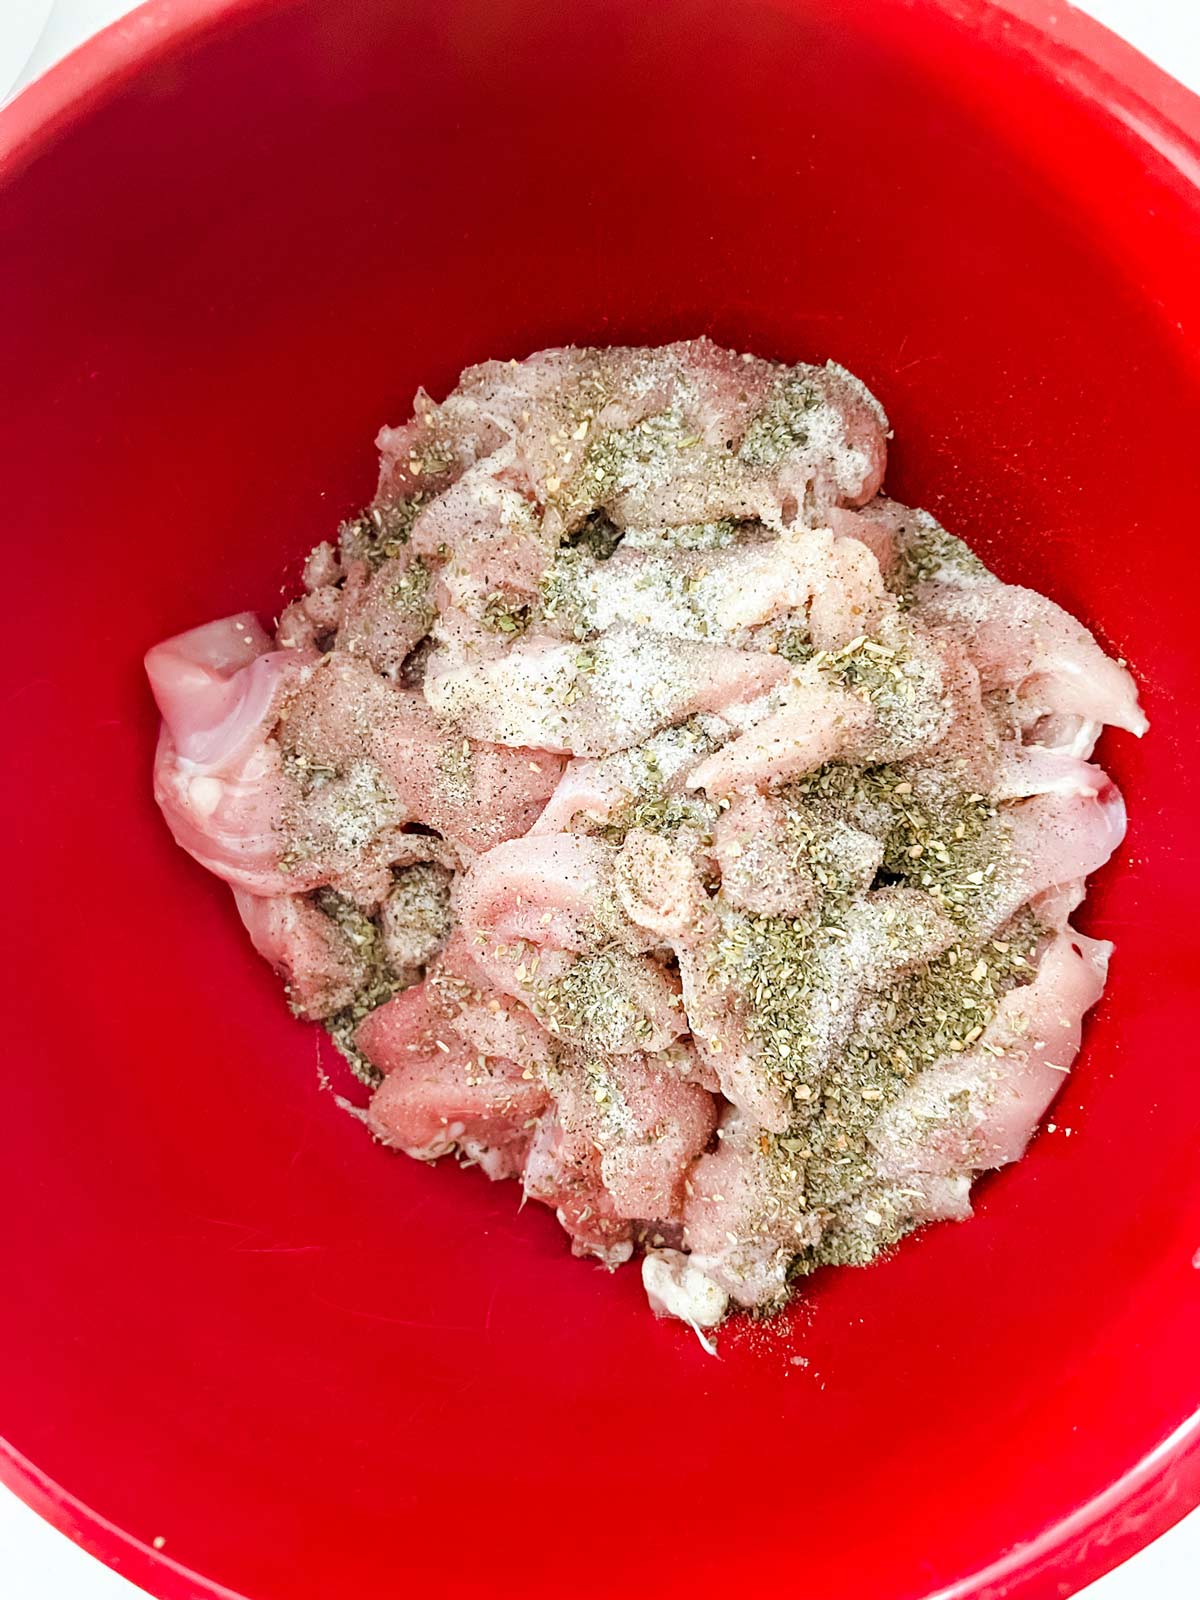 Sliced chicken thighs in a red bowl with seasonings on top.